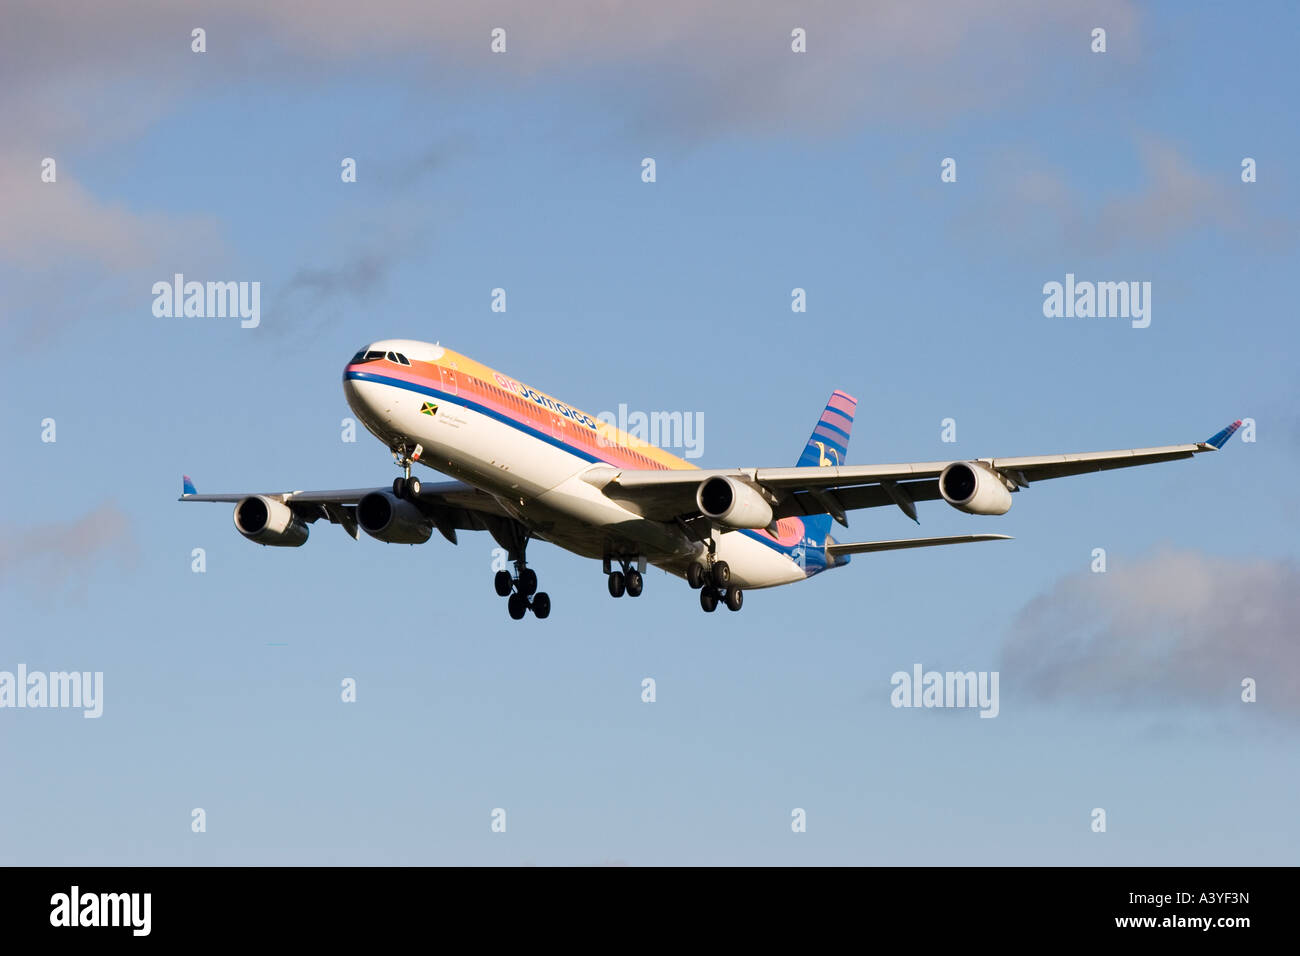 Jamaica Airlines Airbus A340-313X landing at London Heathrow Stock Photo